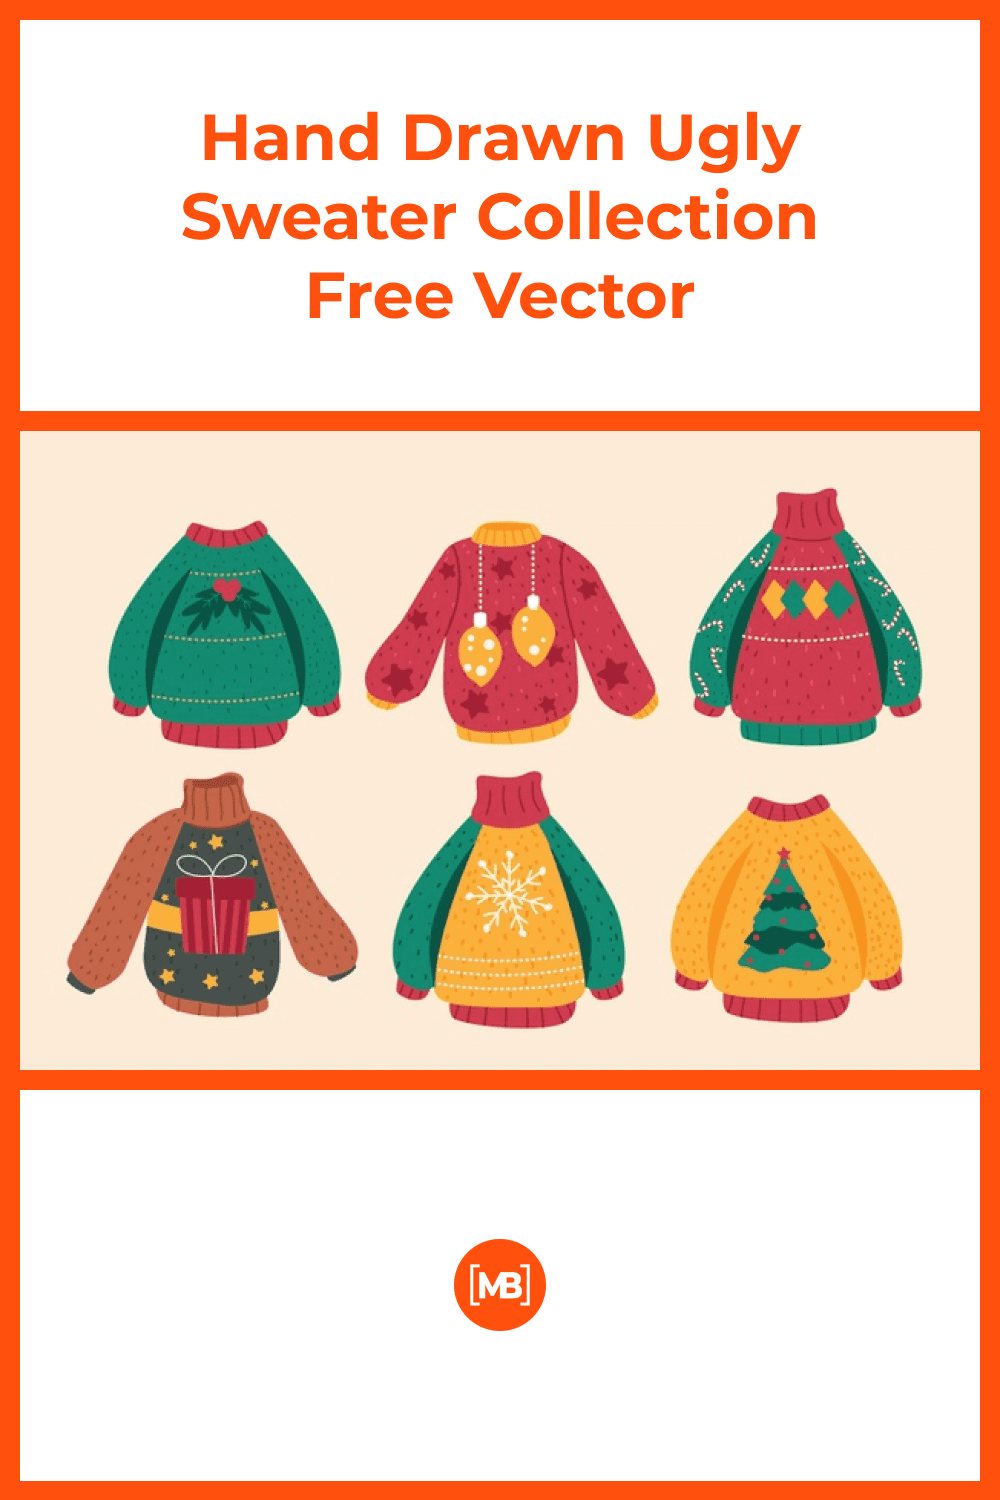 Hand Drawn Ugly Sweater Collection.